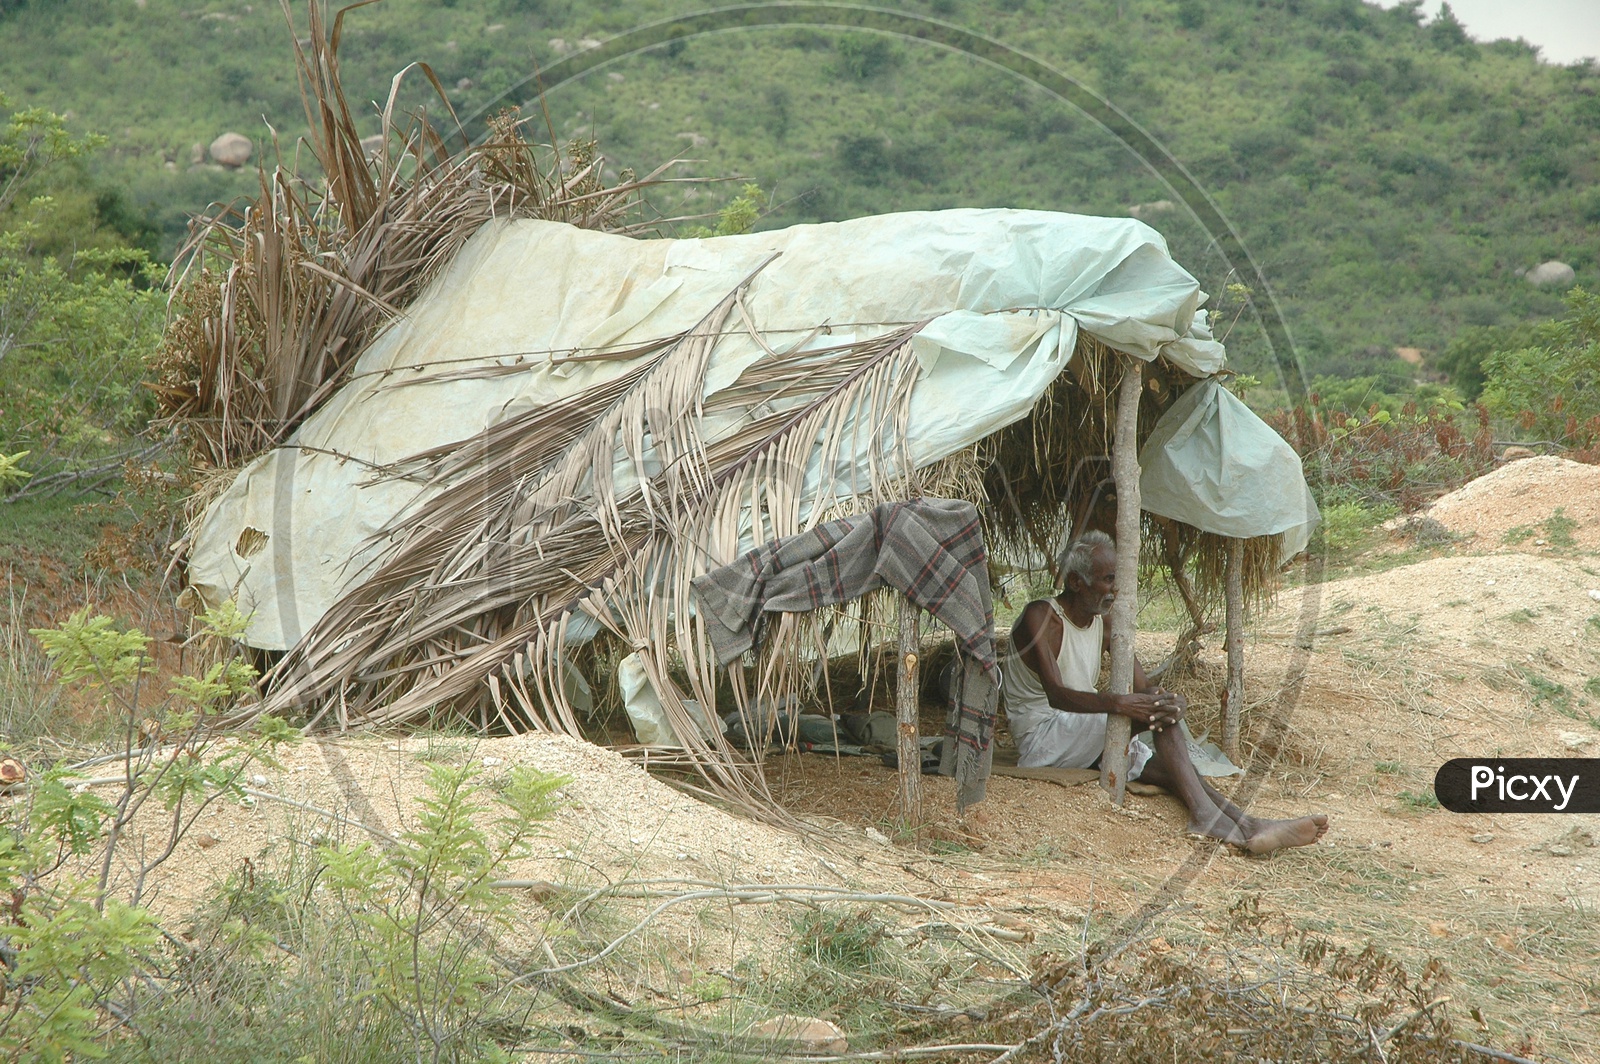 A man takes shelter in a small thatched hut